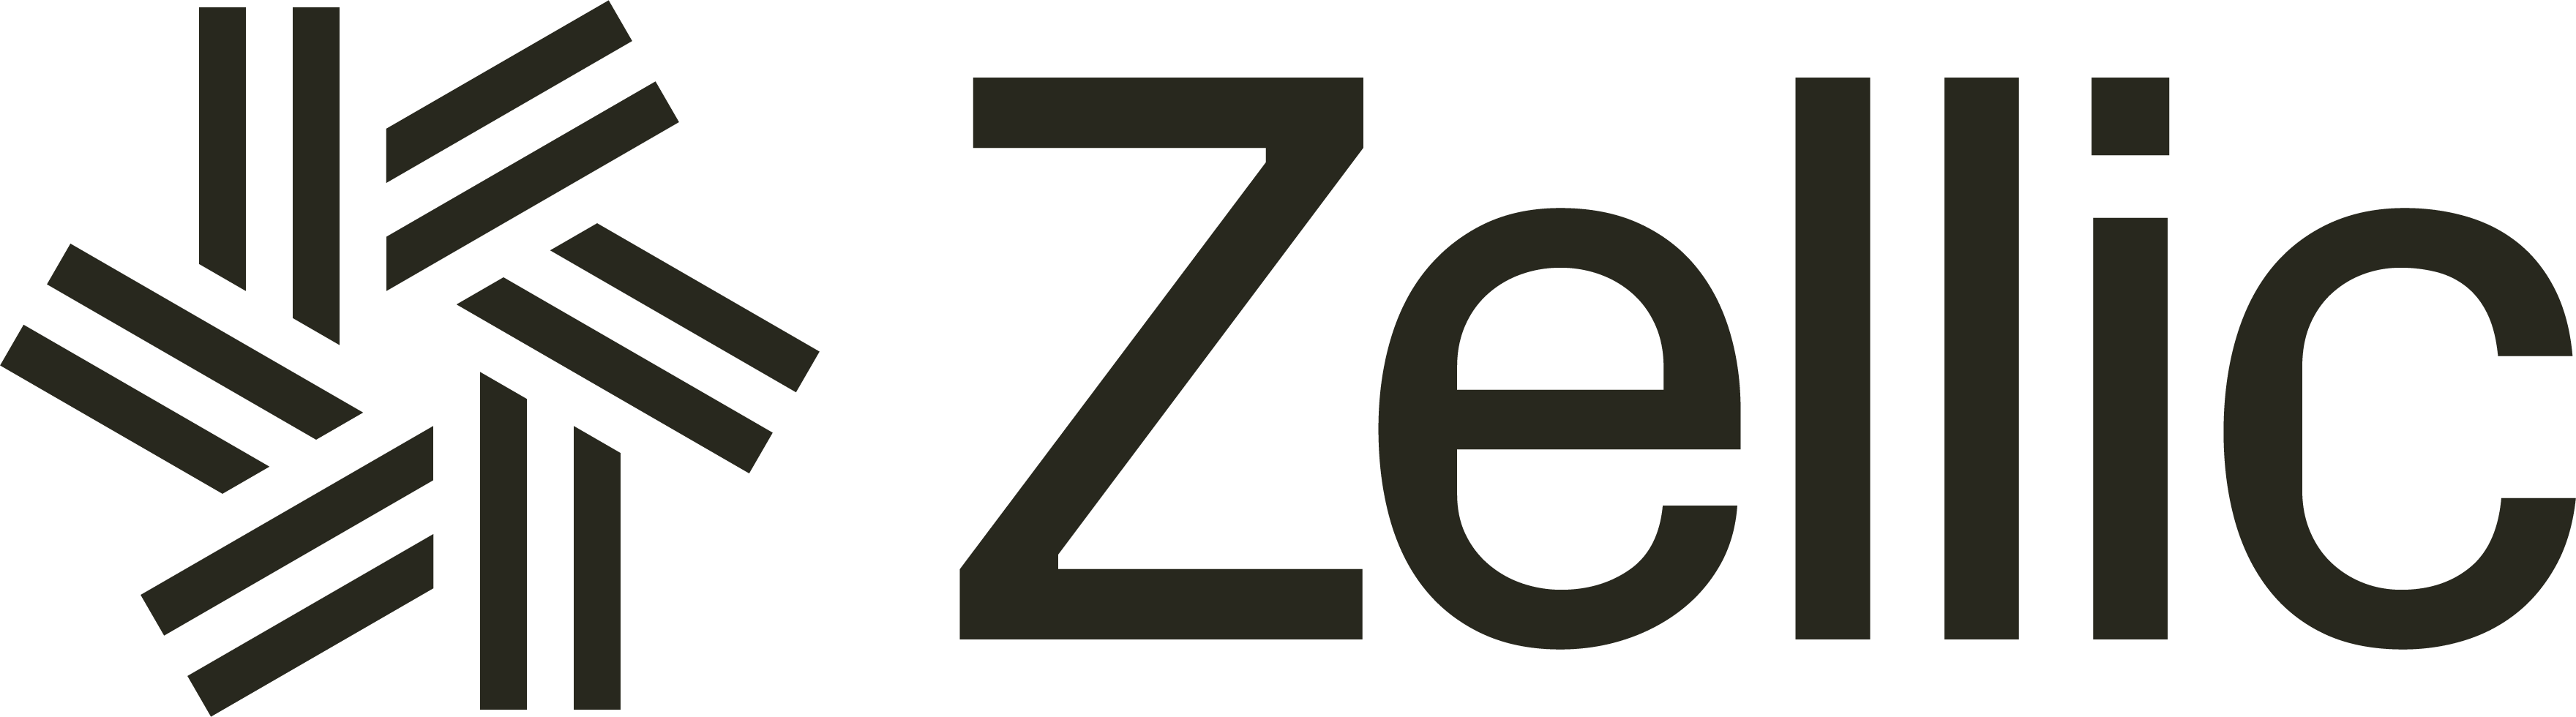 To the left: An interlocking set of lines, resembling a snowflake.  To the right, the Zellic word mark.